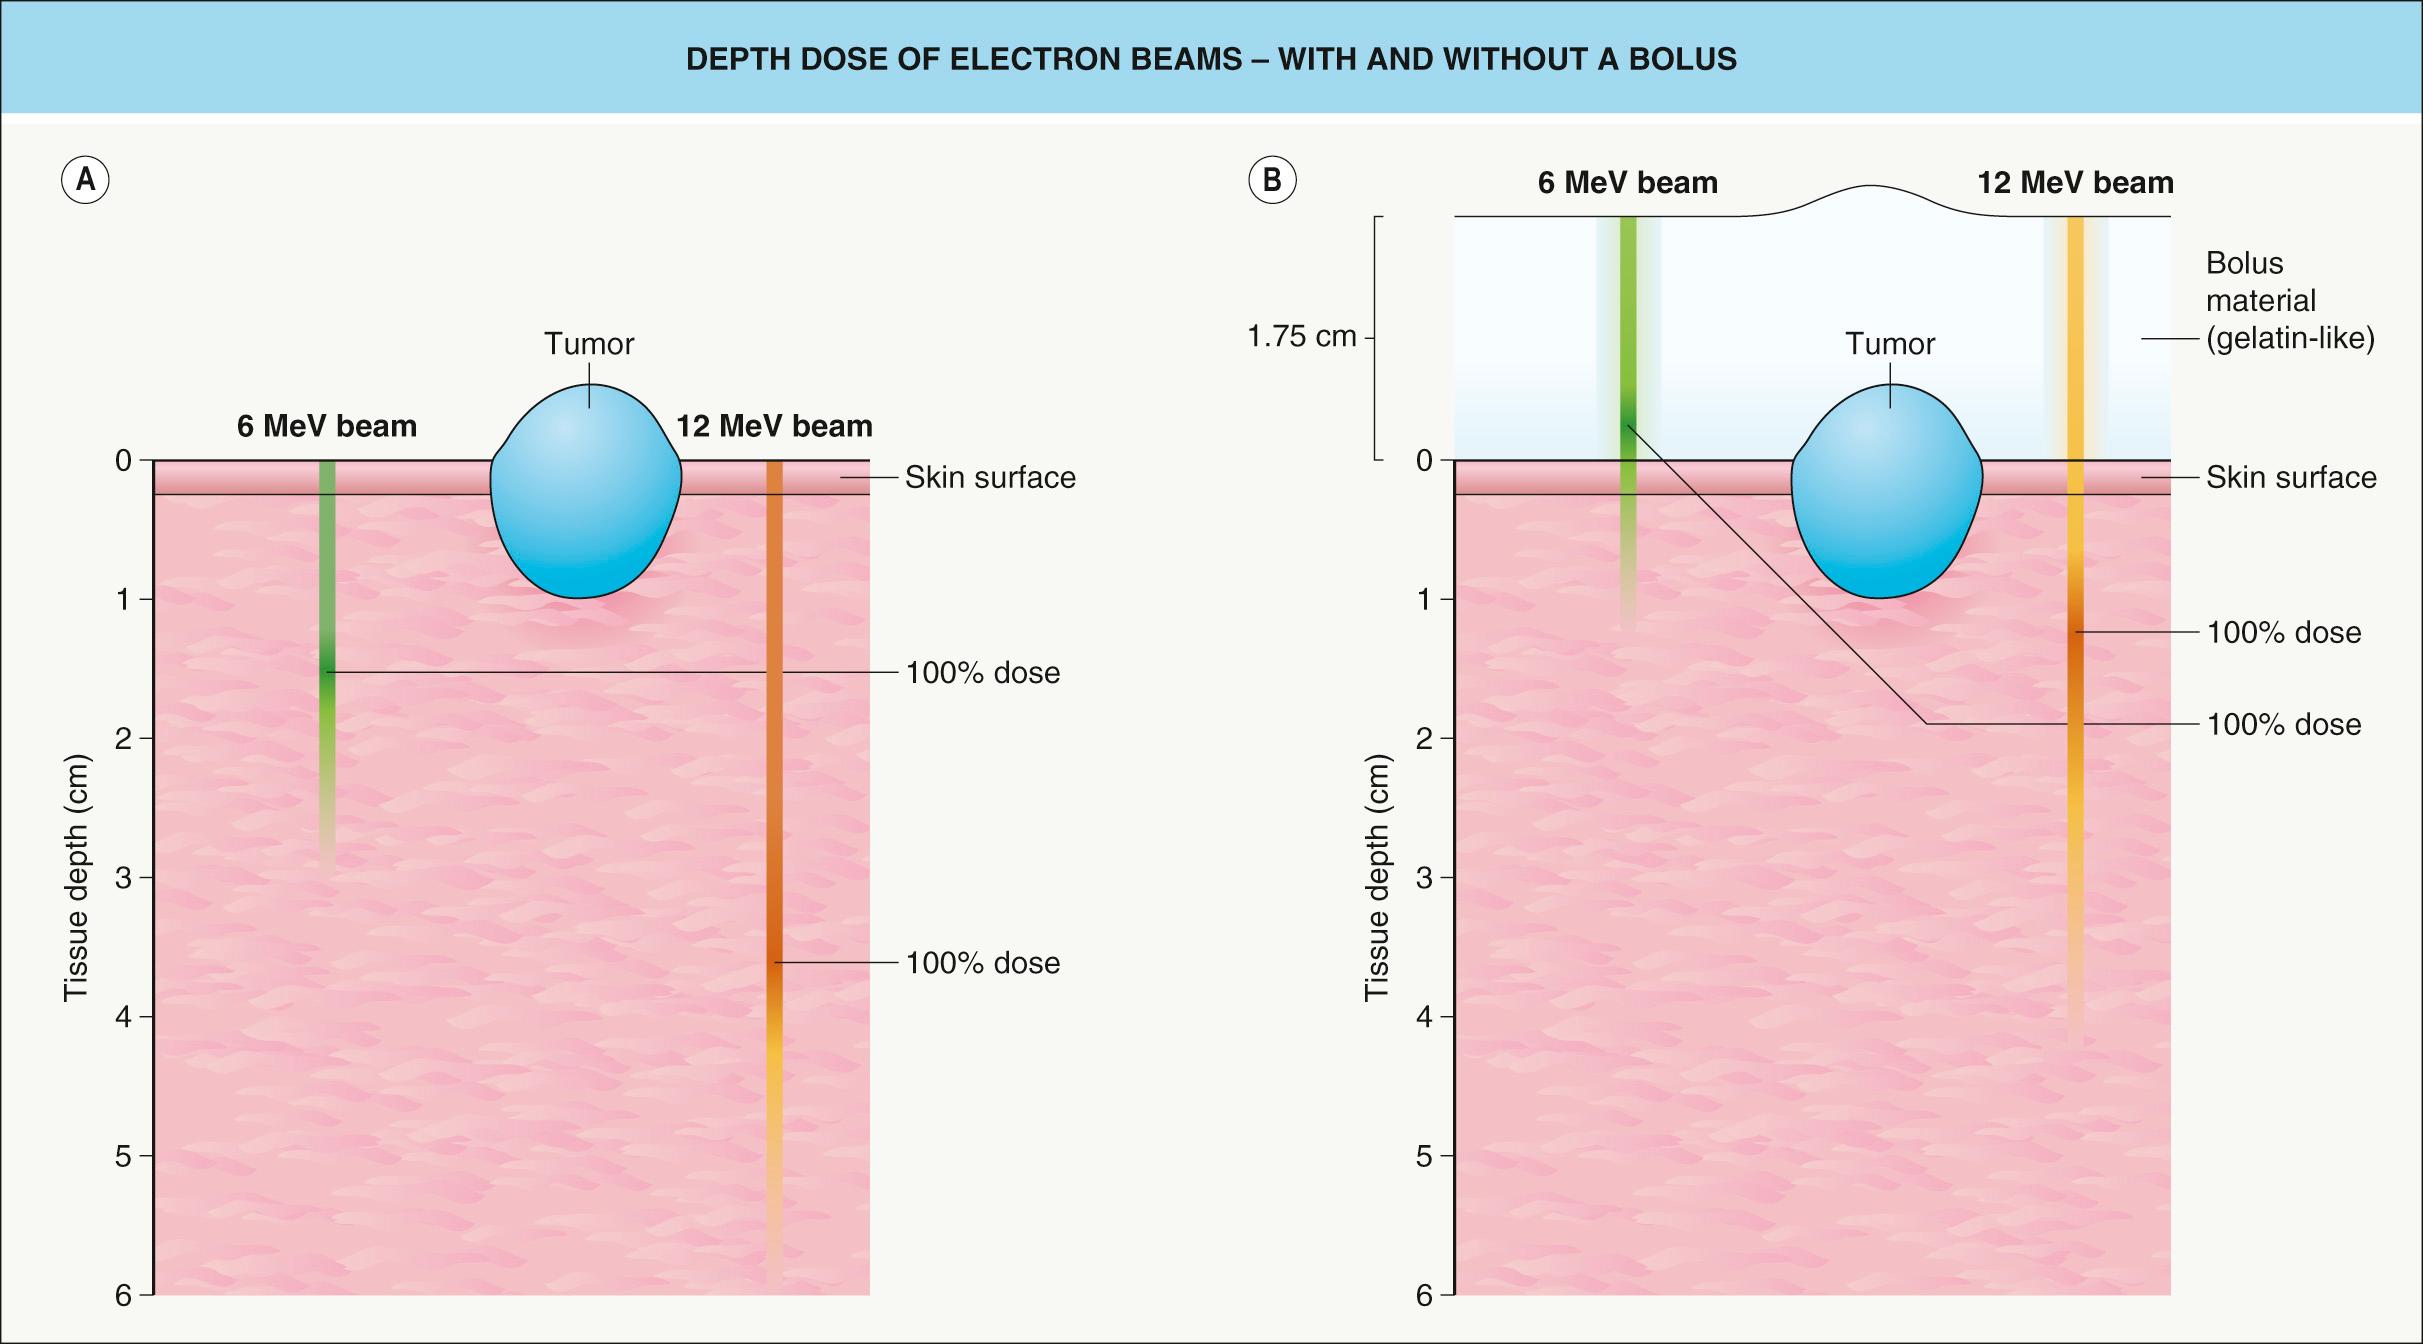 Fig. 139.2, Depth dose of electron beams – with and without a bolus.